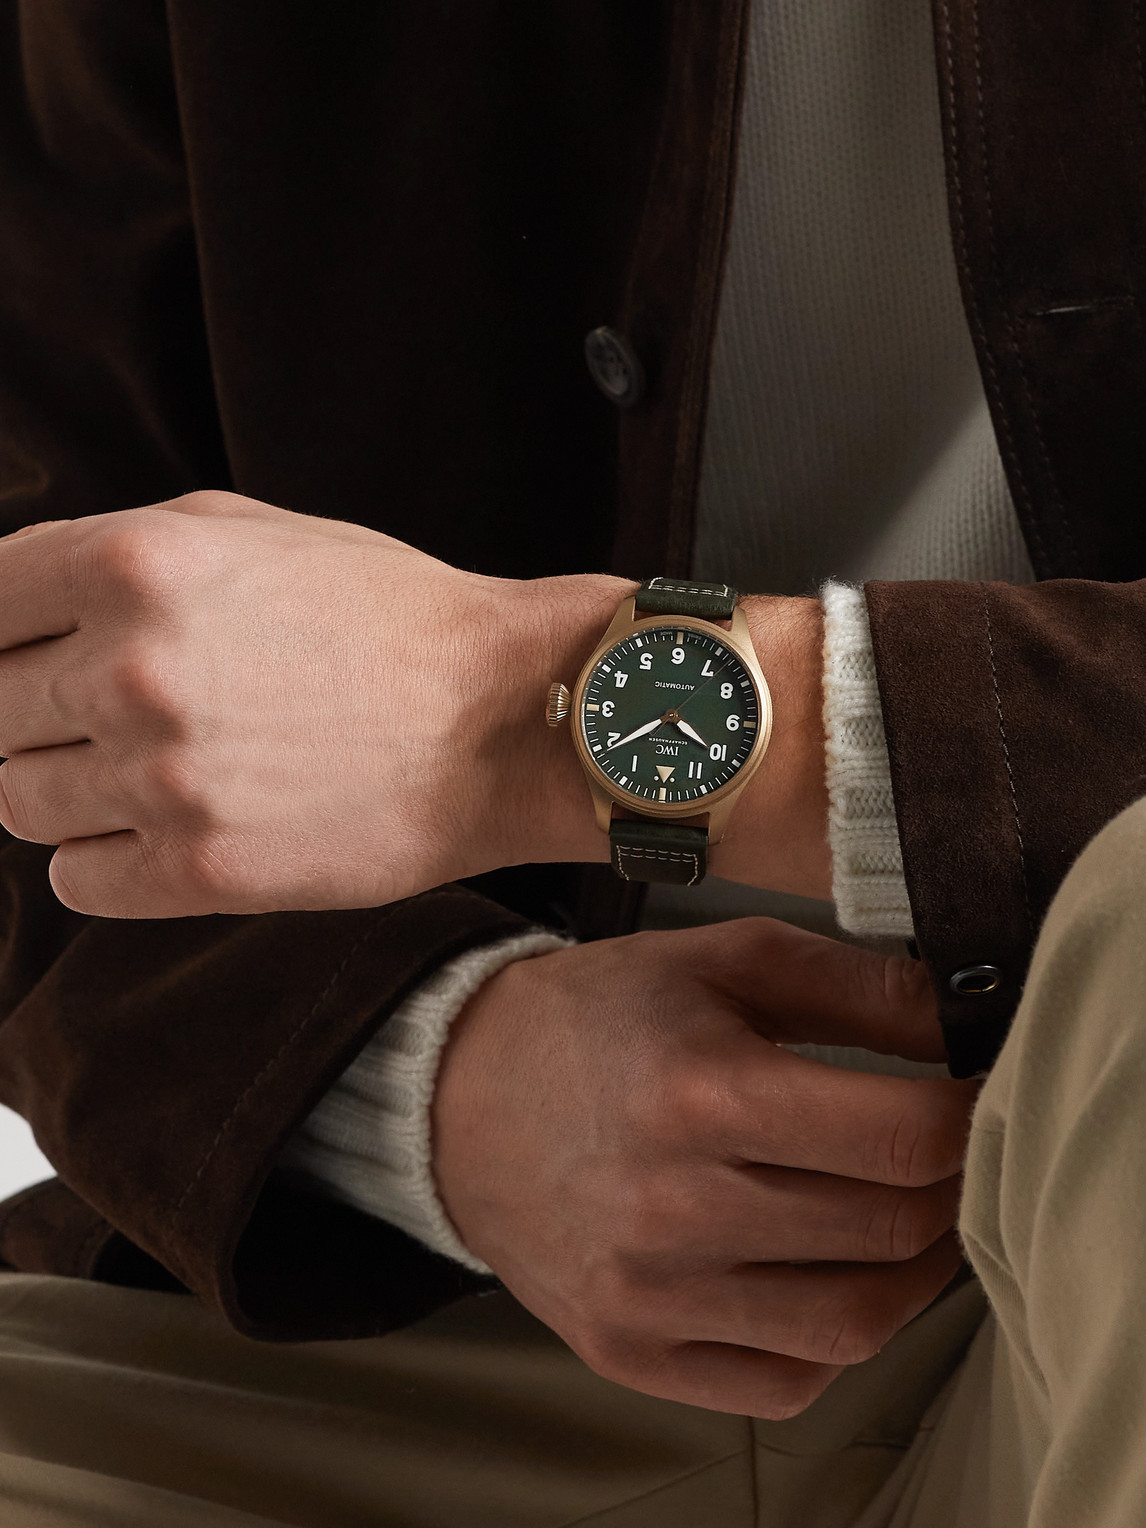 Shop Iwc Schaffhausen Big Pilot's Spitfire Automatic 43mm Bronze And Leather Watch, Ref. No. Iw329702 In Green